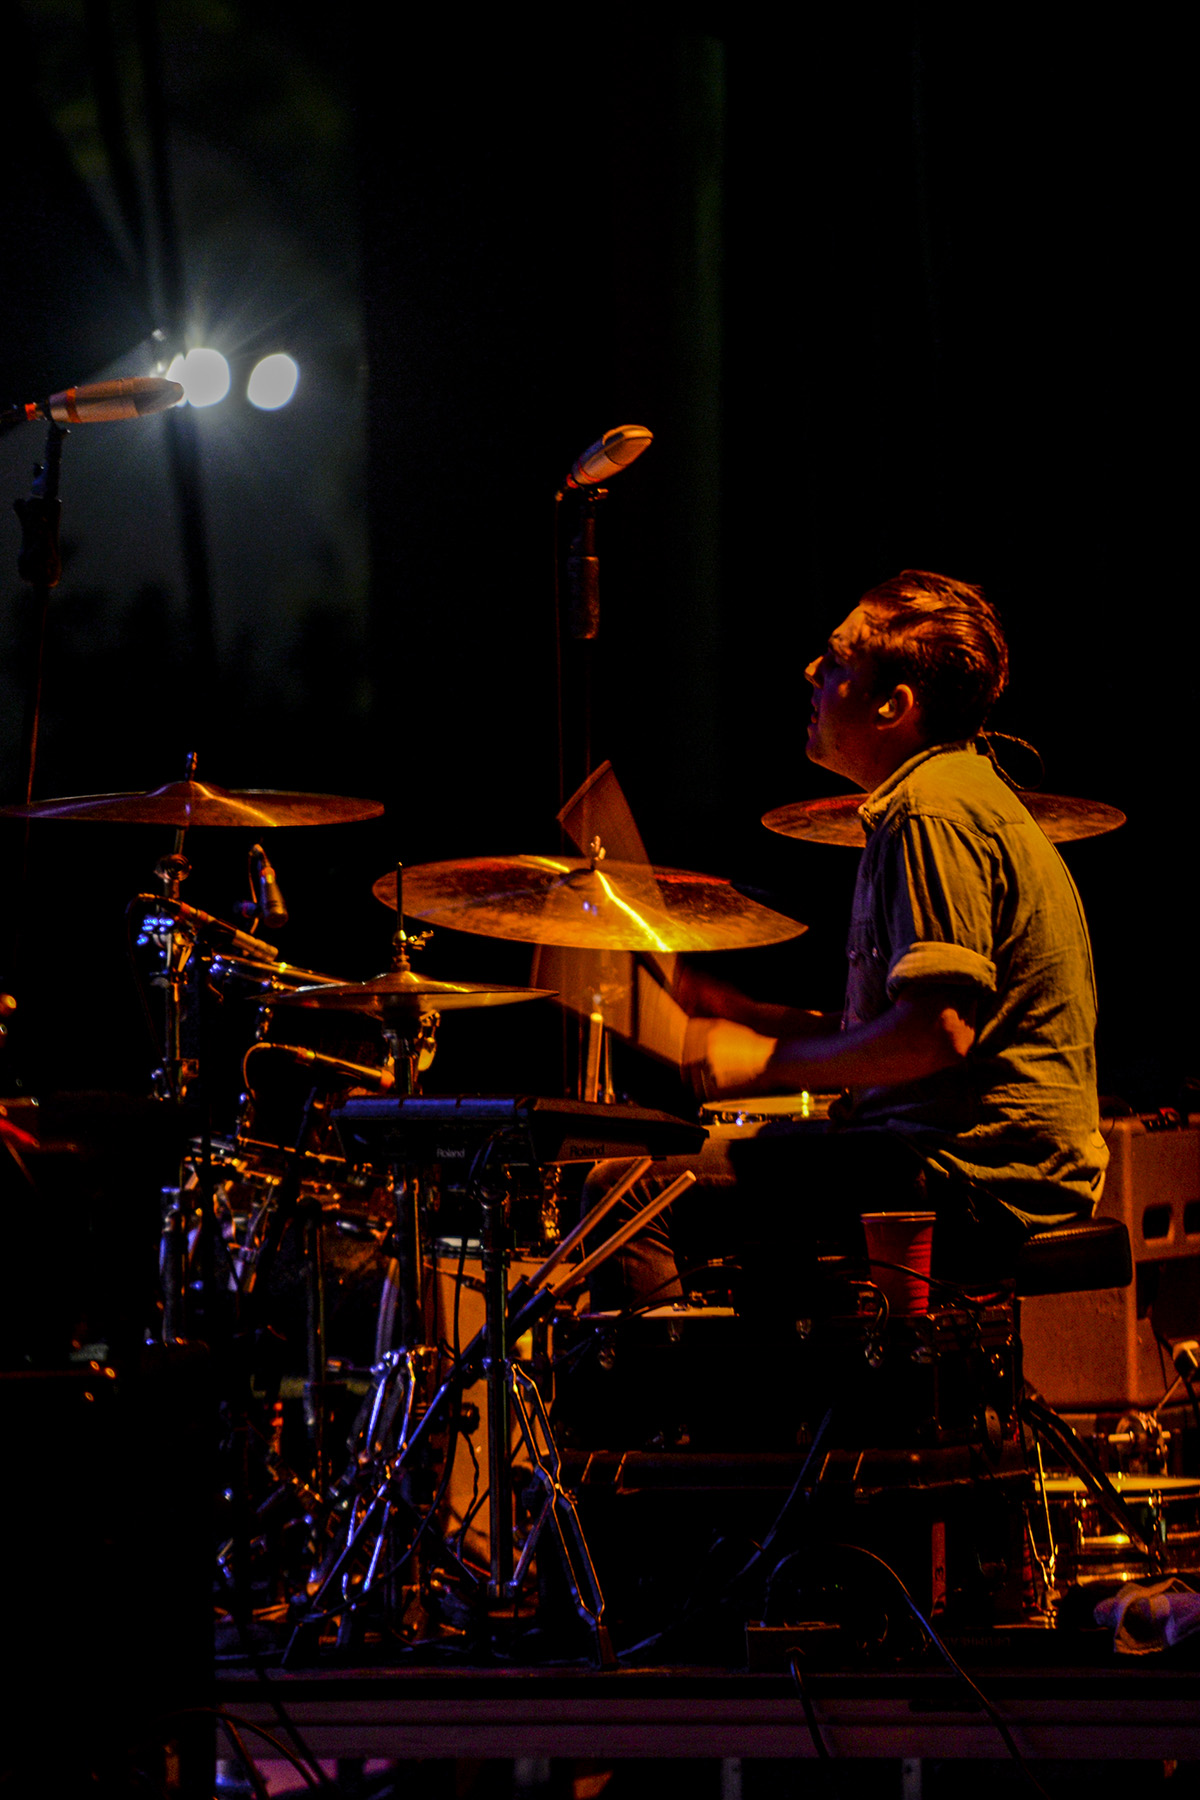 a man playing the drums on stage in a darkened room